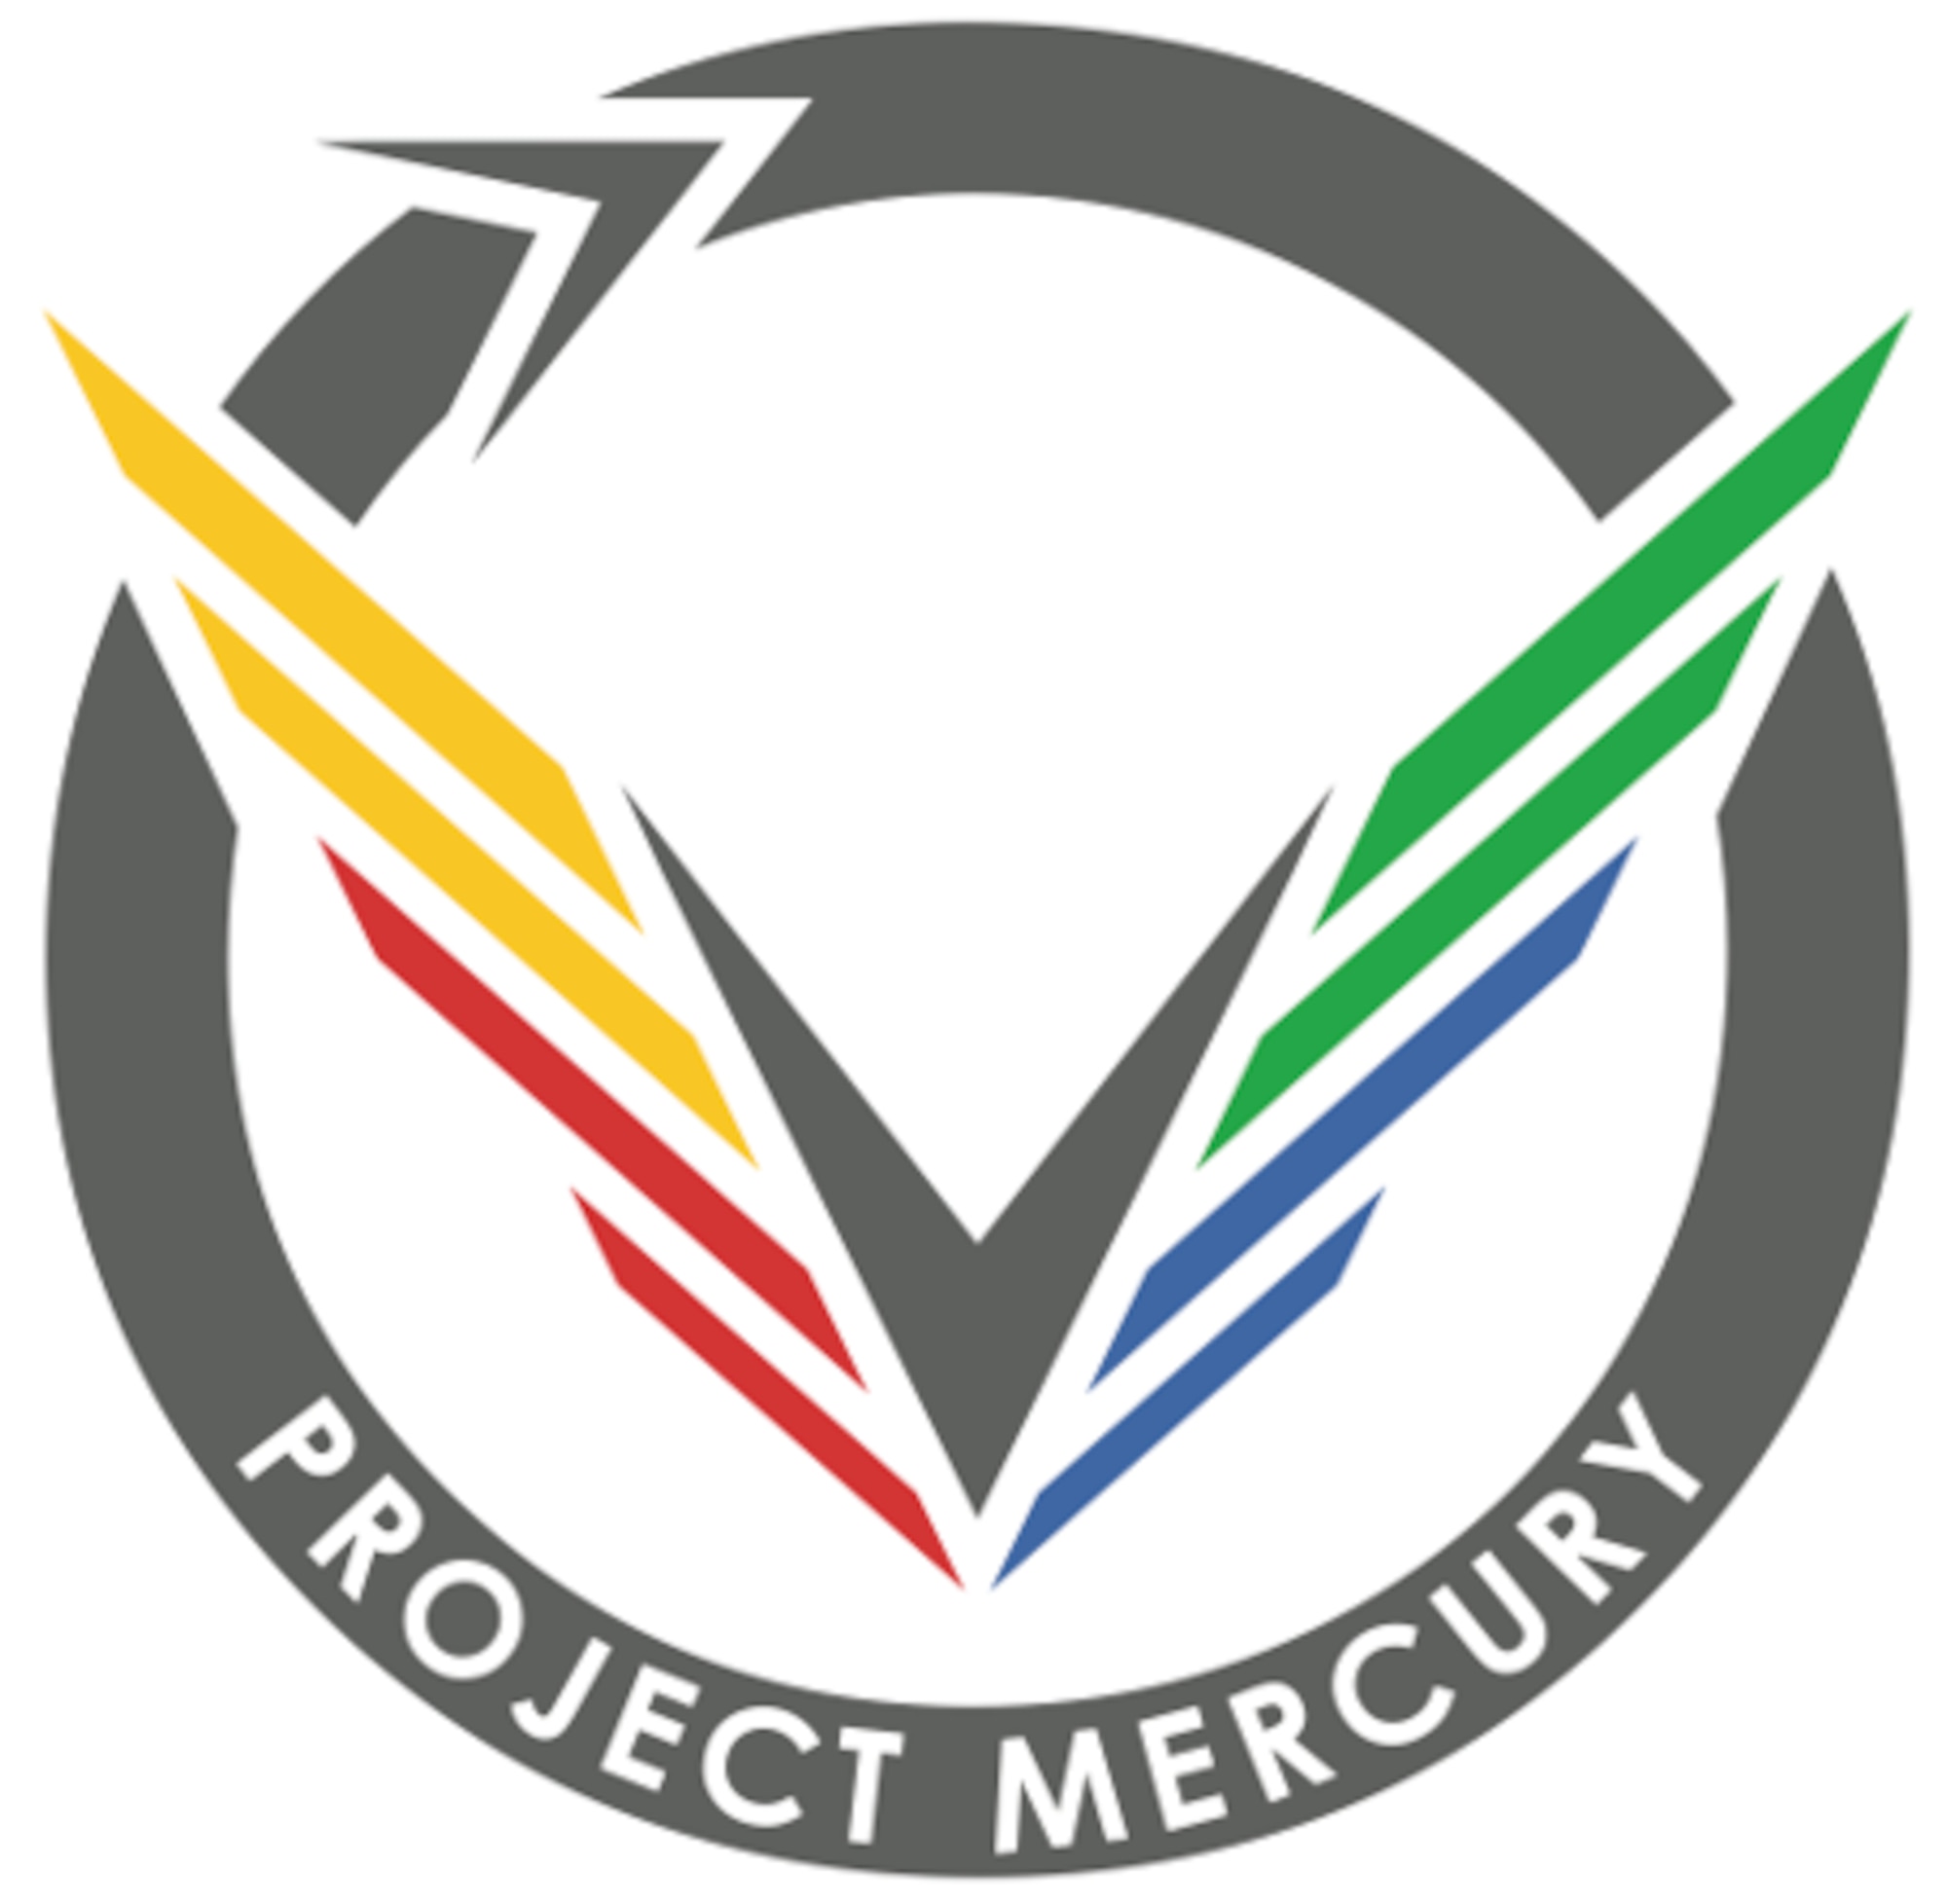 AU Project Mercury, as seen in the atch’d logo, metaphorically launches Airmen into orbit around our Air Force bureaucracy during their 90-day cohort period so they can innovate and incubate new concepts and technologies.  Following the 90-day period, Airmen return from orbit to pitch their proofs of concept and transition the new concepts and technologies into the Air Force.  The launch vehicle for AU Project Mercury is the Innovation Genome methodology created by Dr. Jeff DeGraff (Innovatrium and University of Michigan).  The four colors (red, blue, yellow, green) in the logo are the color codes from the Innovation Genome and relate to how individuals and organization innovate (i.e., engineer/control, athlete/compete, sage/collaborate, artist/create).